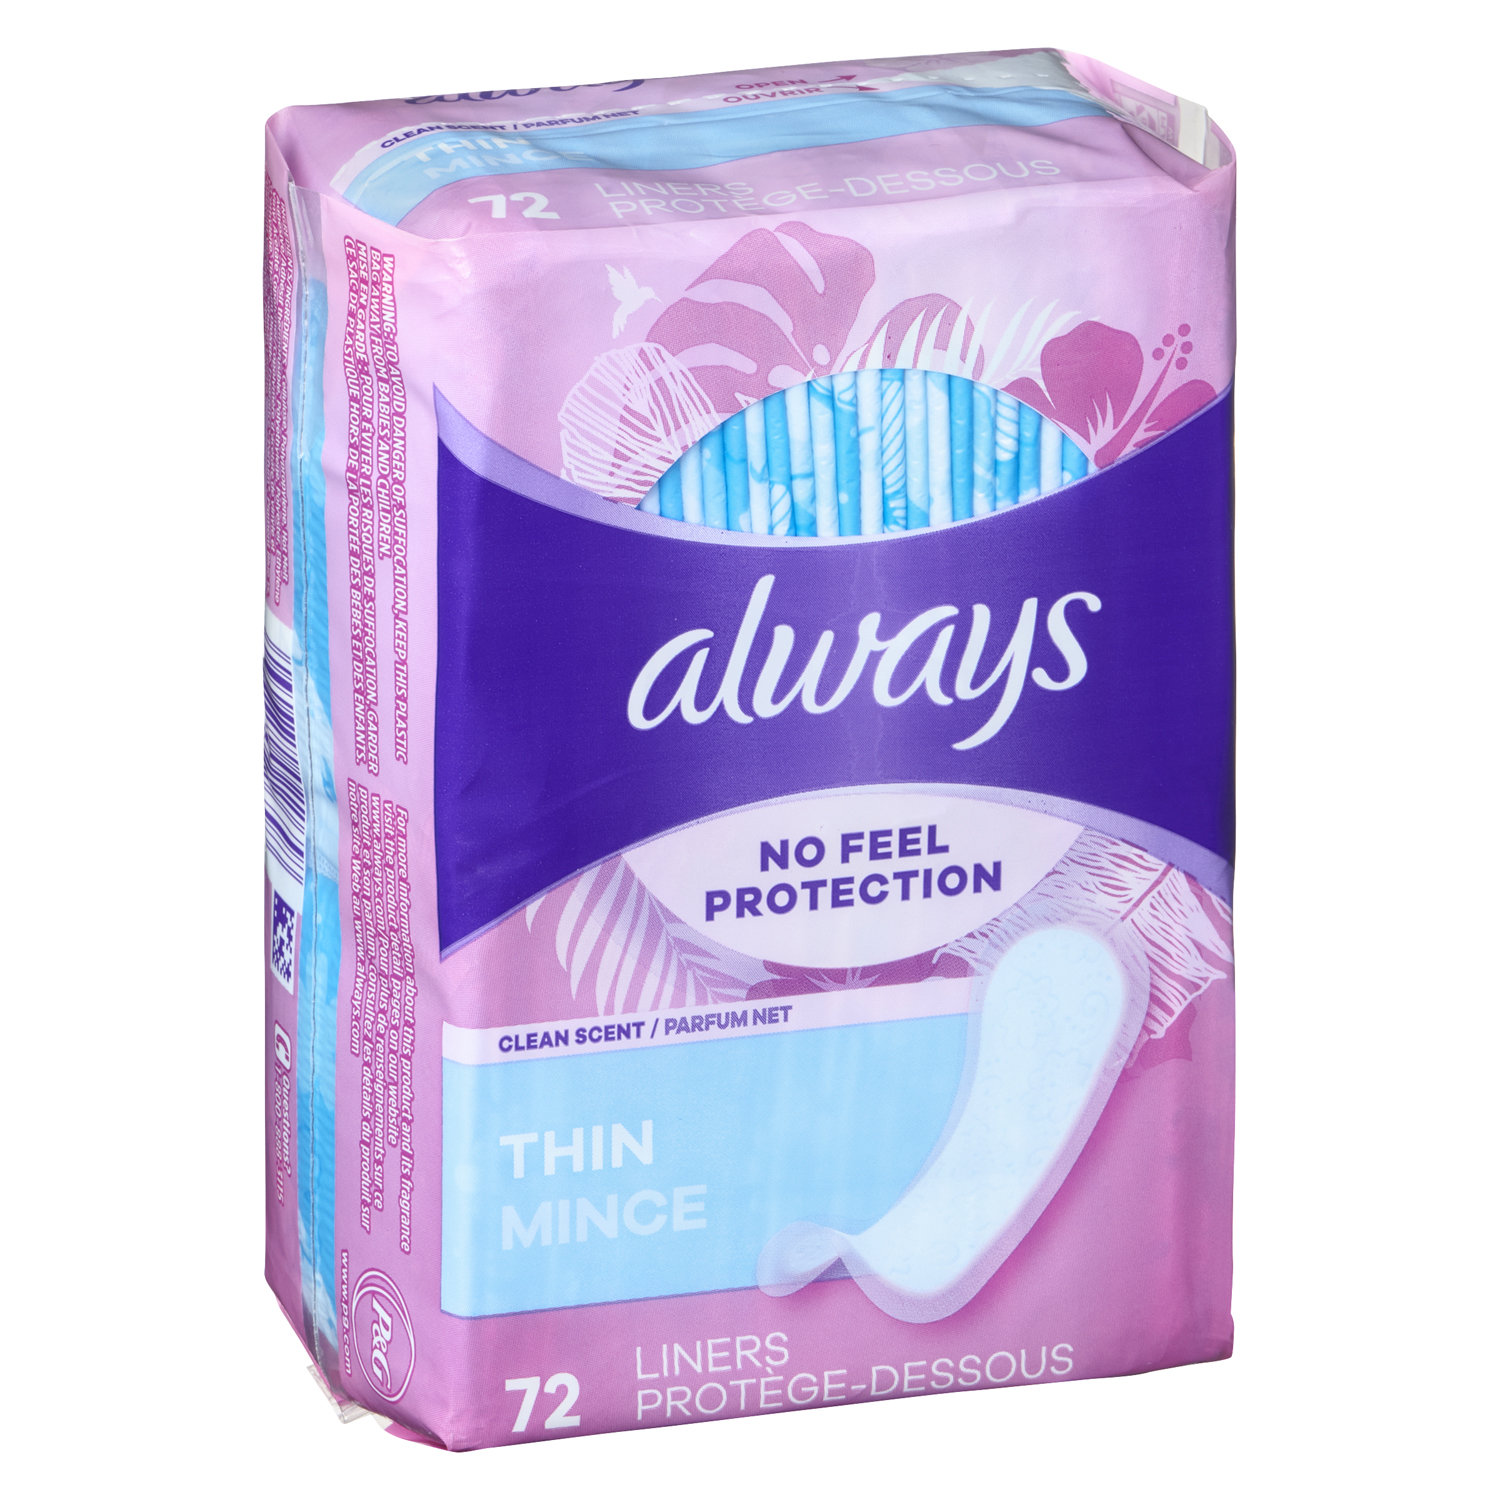 Wholesale medicated panty liner Sanitary Liners, Feminine Care Products 